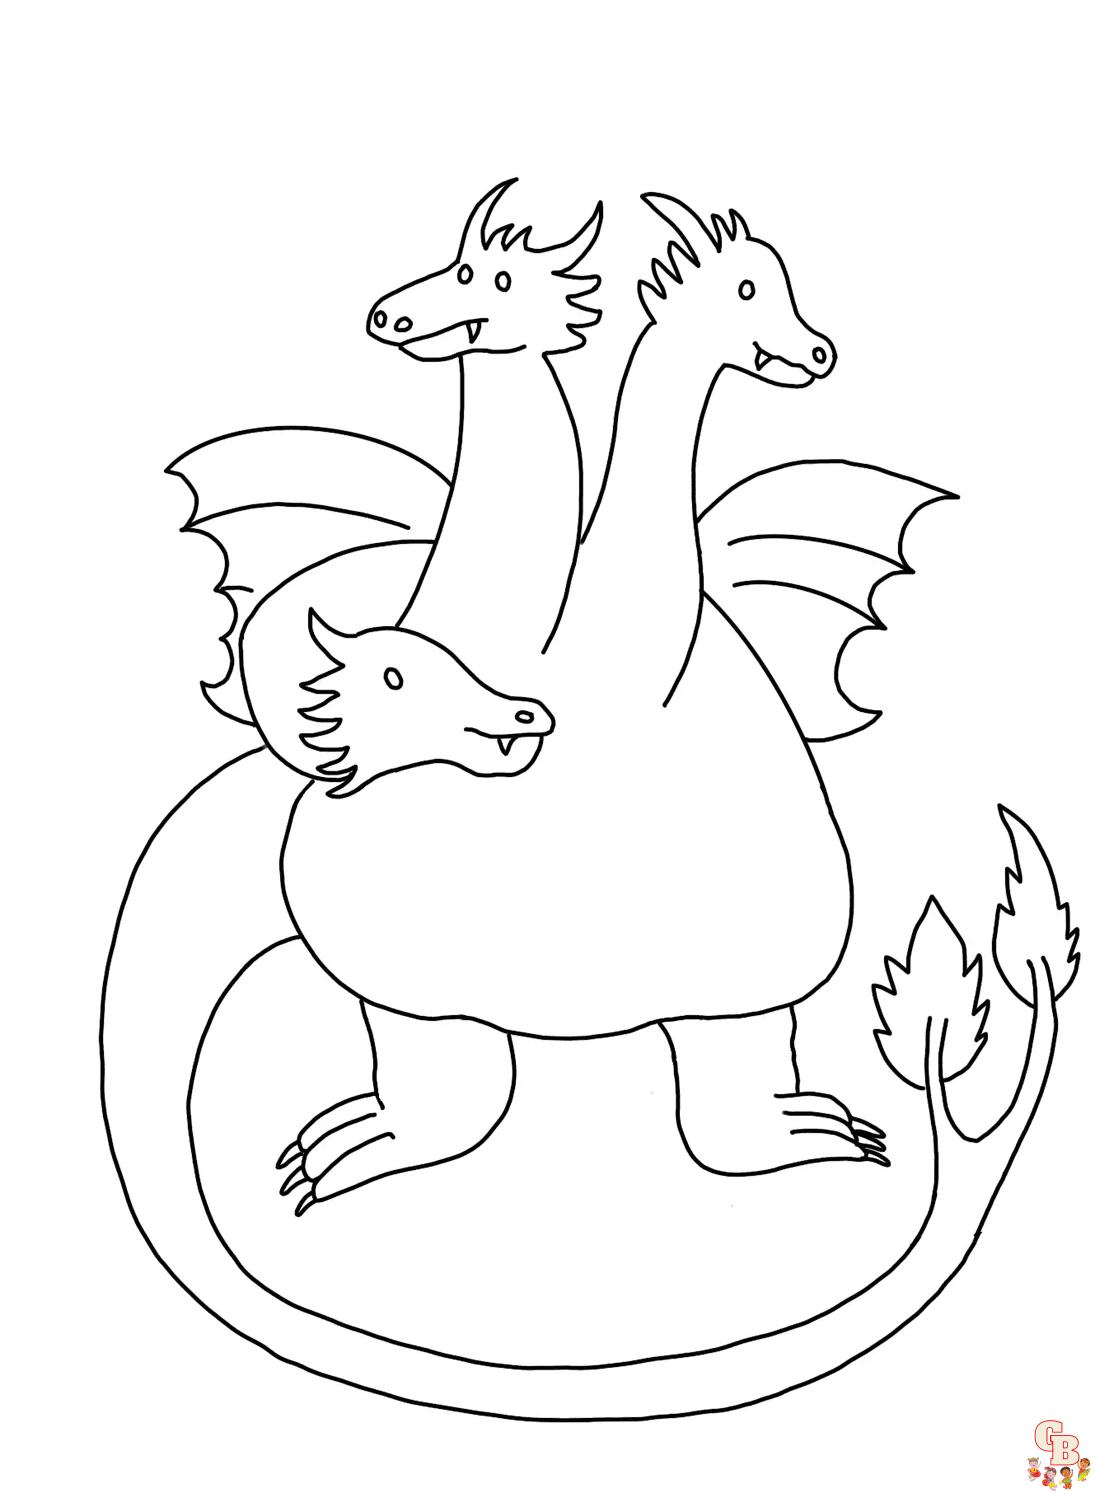 Find the best king ghidorah coloring pages on